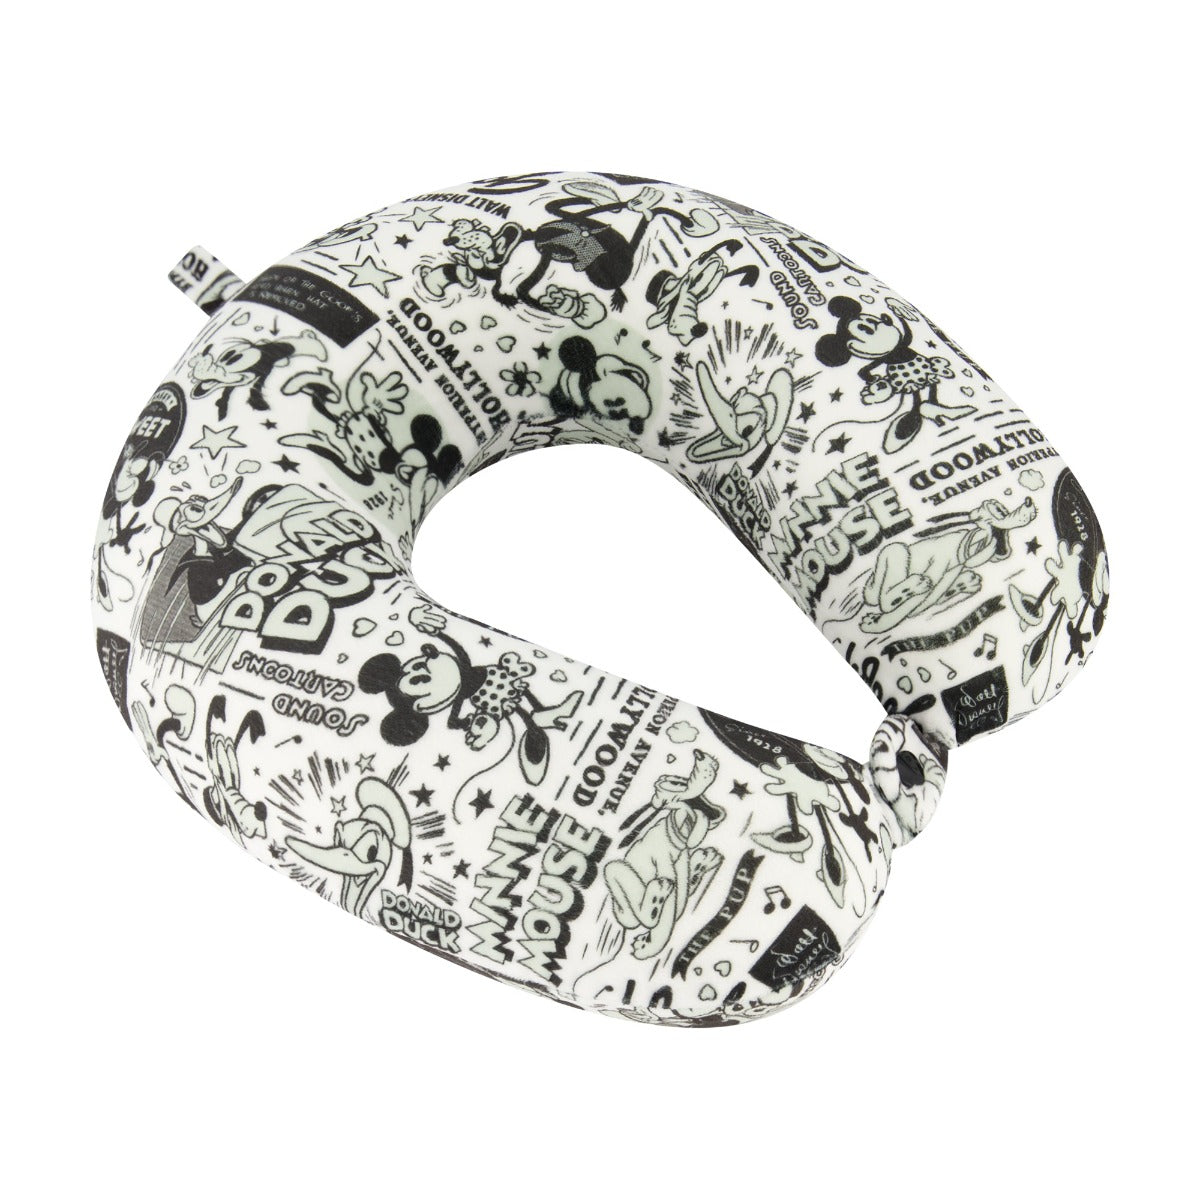 Black and white print Ful Disney 100 year anniversary characters all over travel neck pillow 